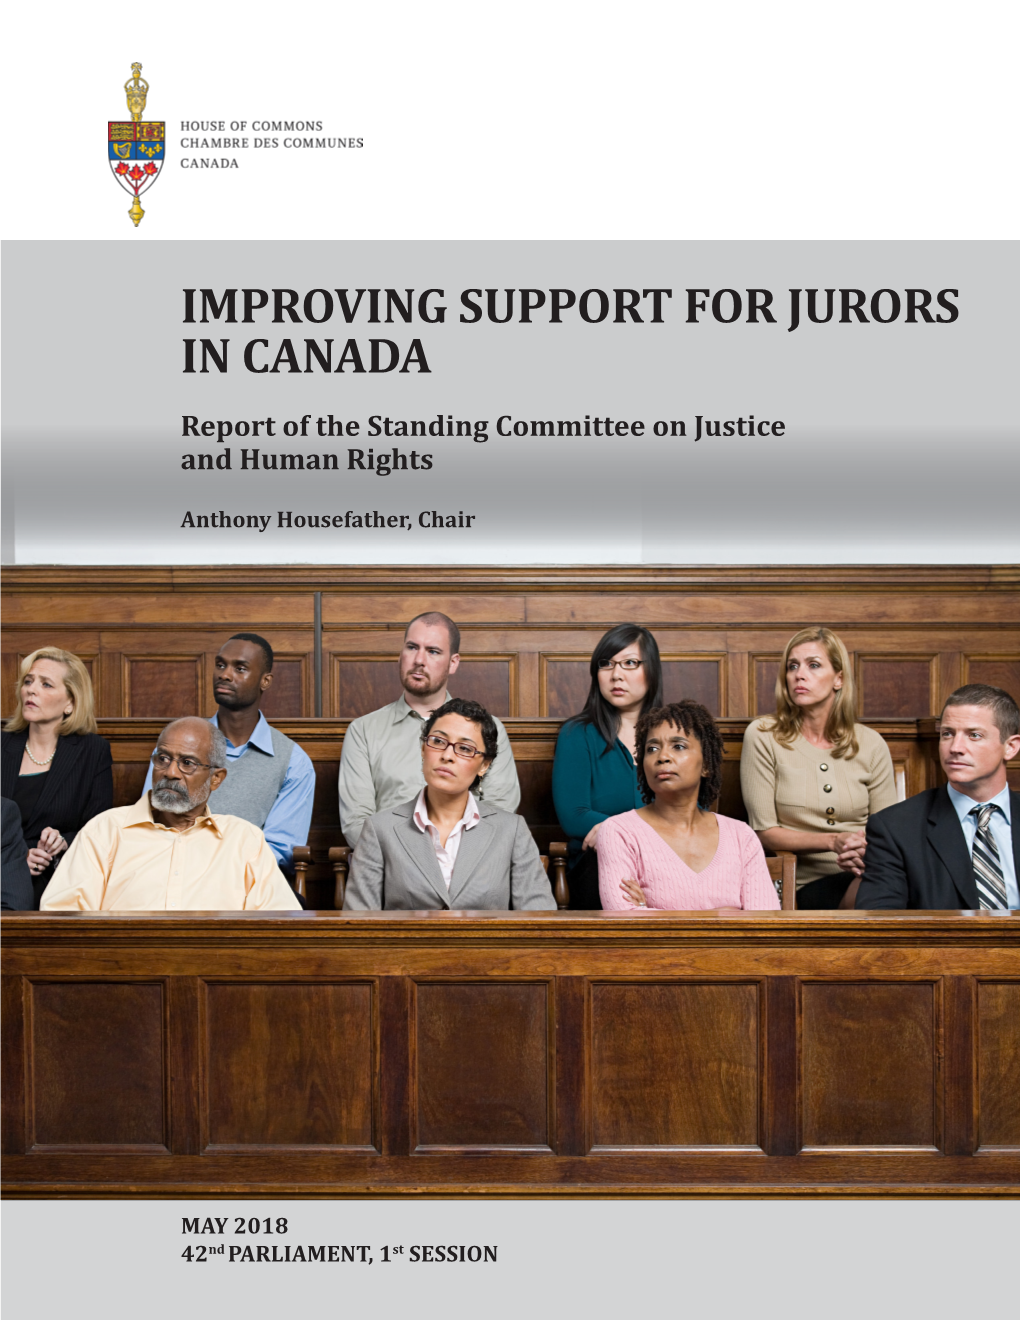 IMPROVING SUPPORT for JURORS in CANADA Report of the Standing Committee on Justice and Human Rights